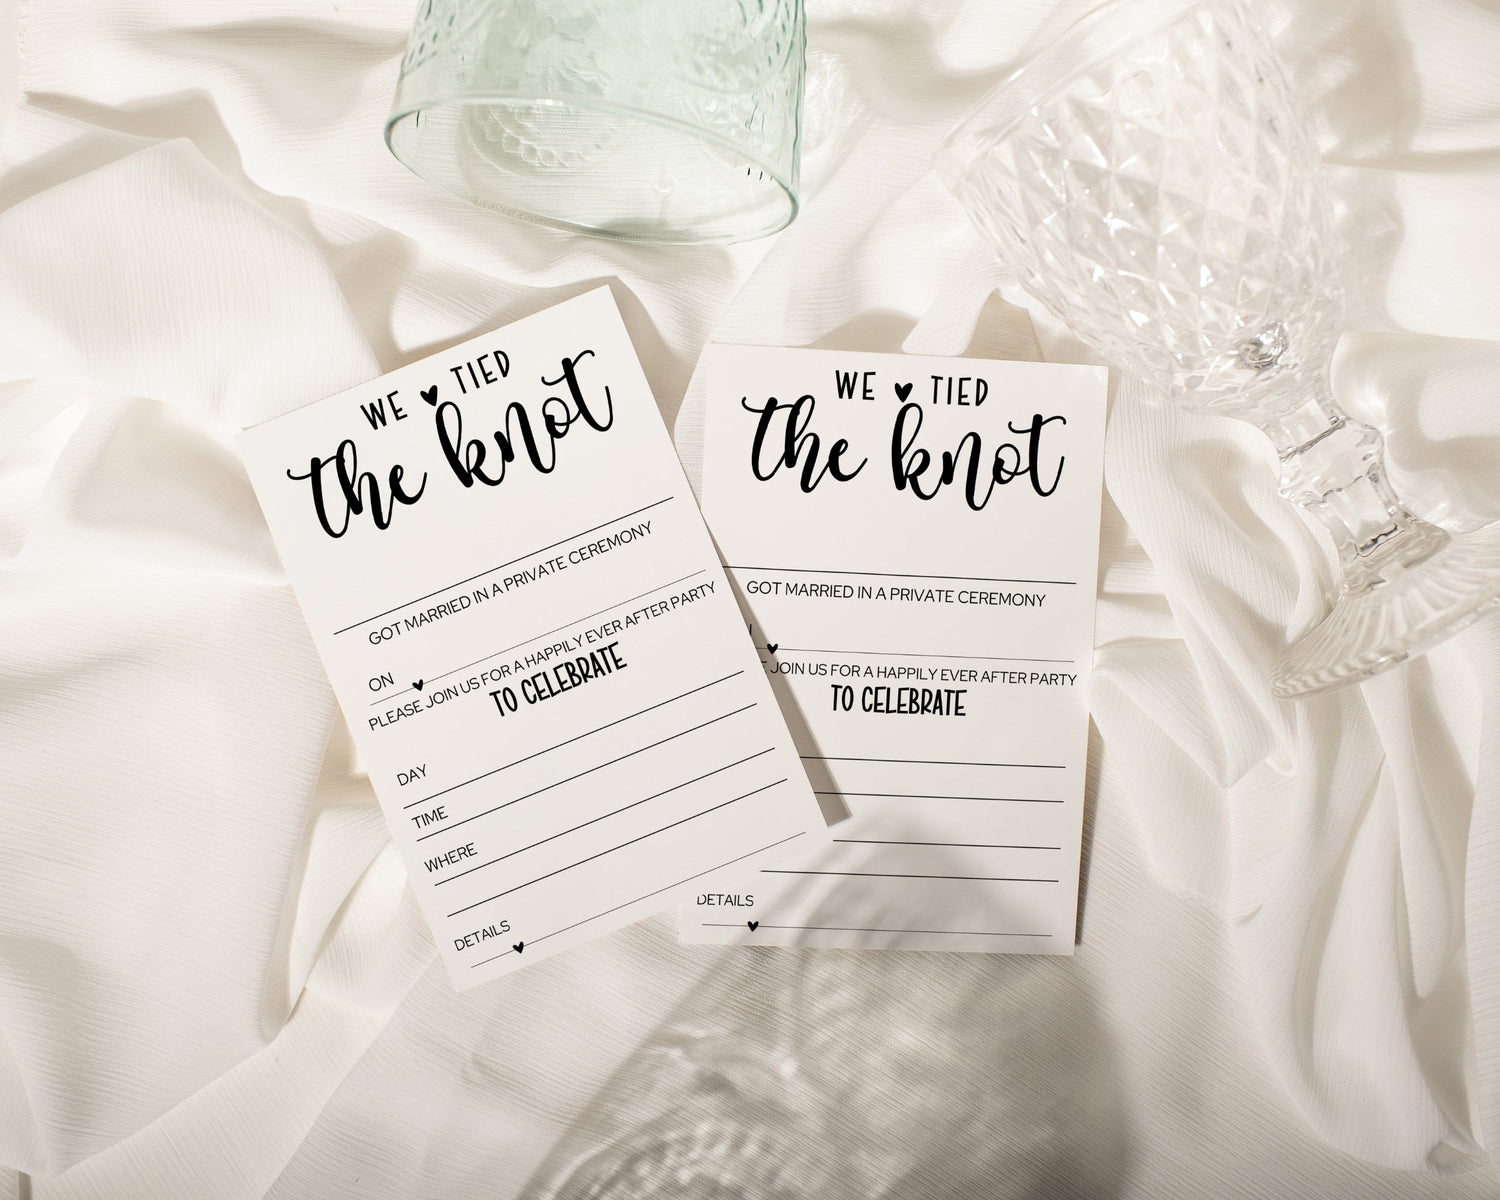  Ideal for birthdays, weddings, or casual gatherings, these customizable invites blend classic style with your personal touch. Make every occasion unforgettable!